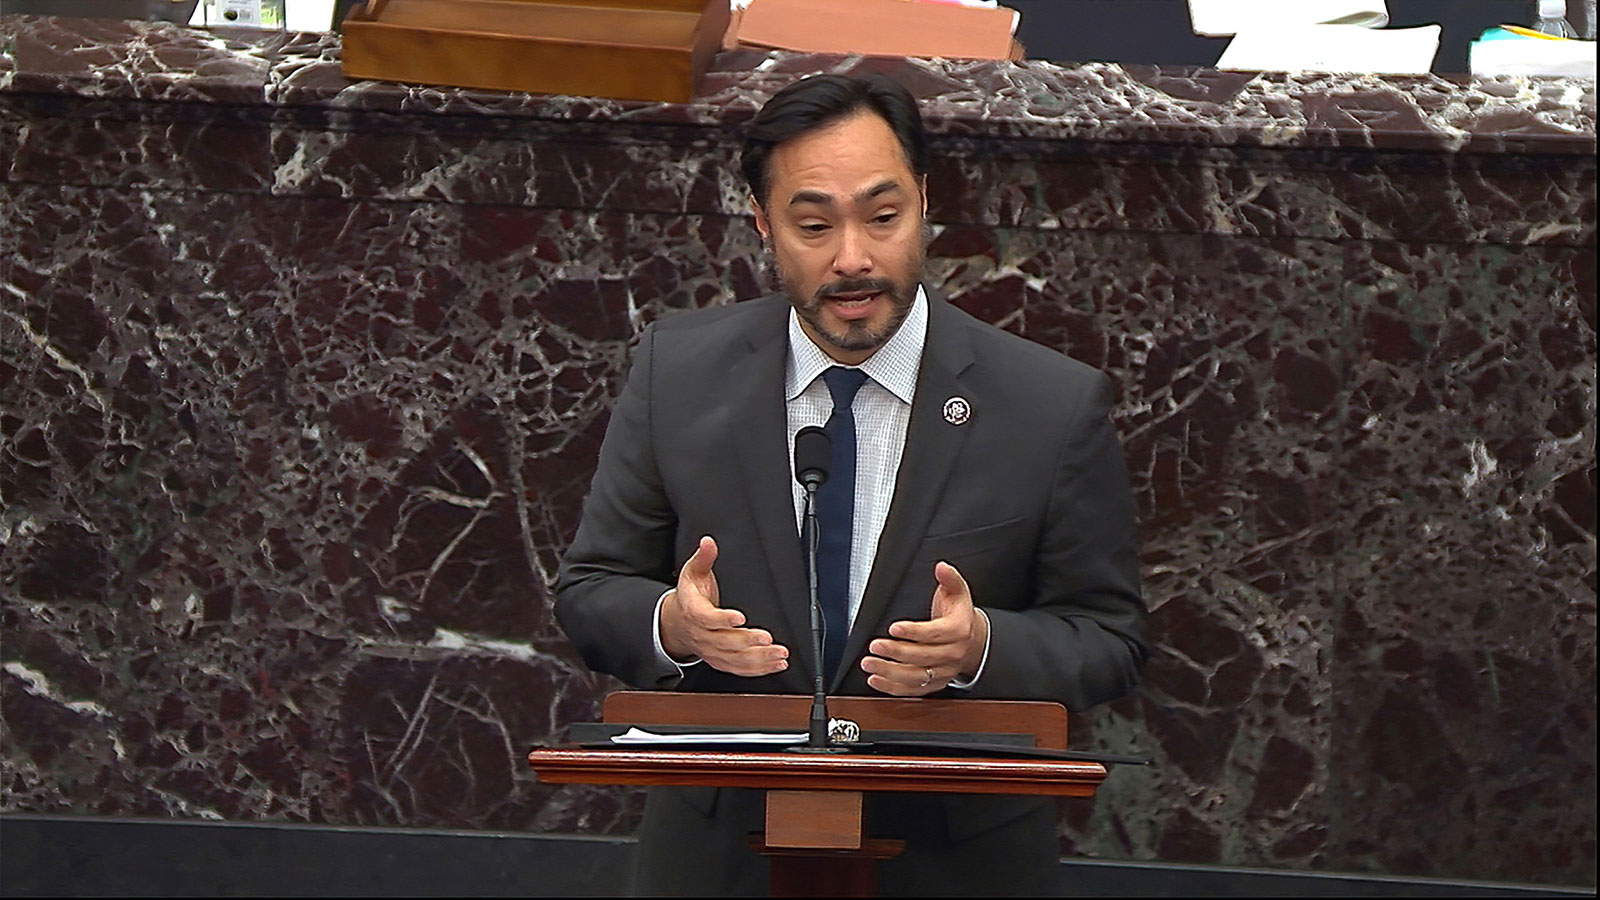 Impeachment manager Rep. Joaquin Castro speaks during Trump's impeachment trial on Wednesday, February 10.